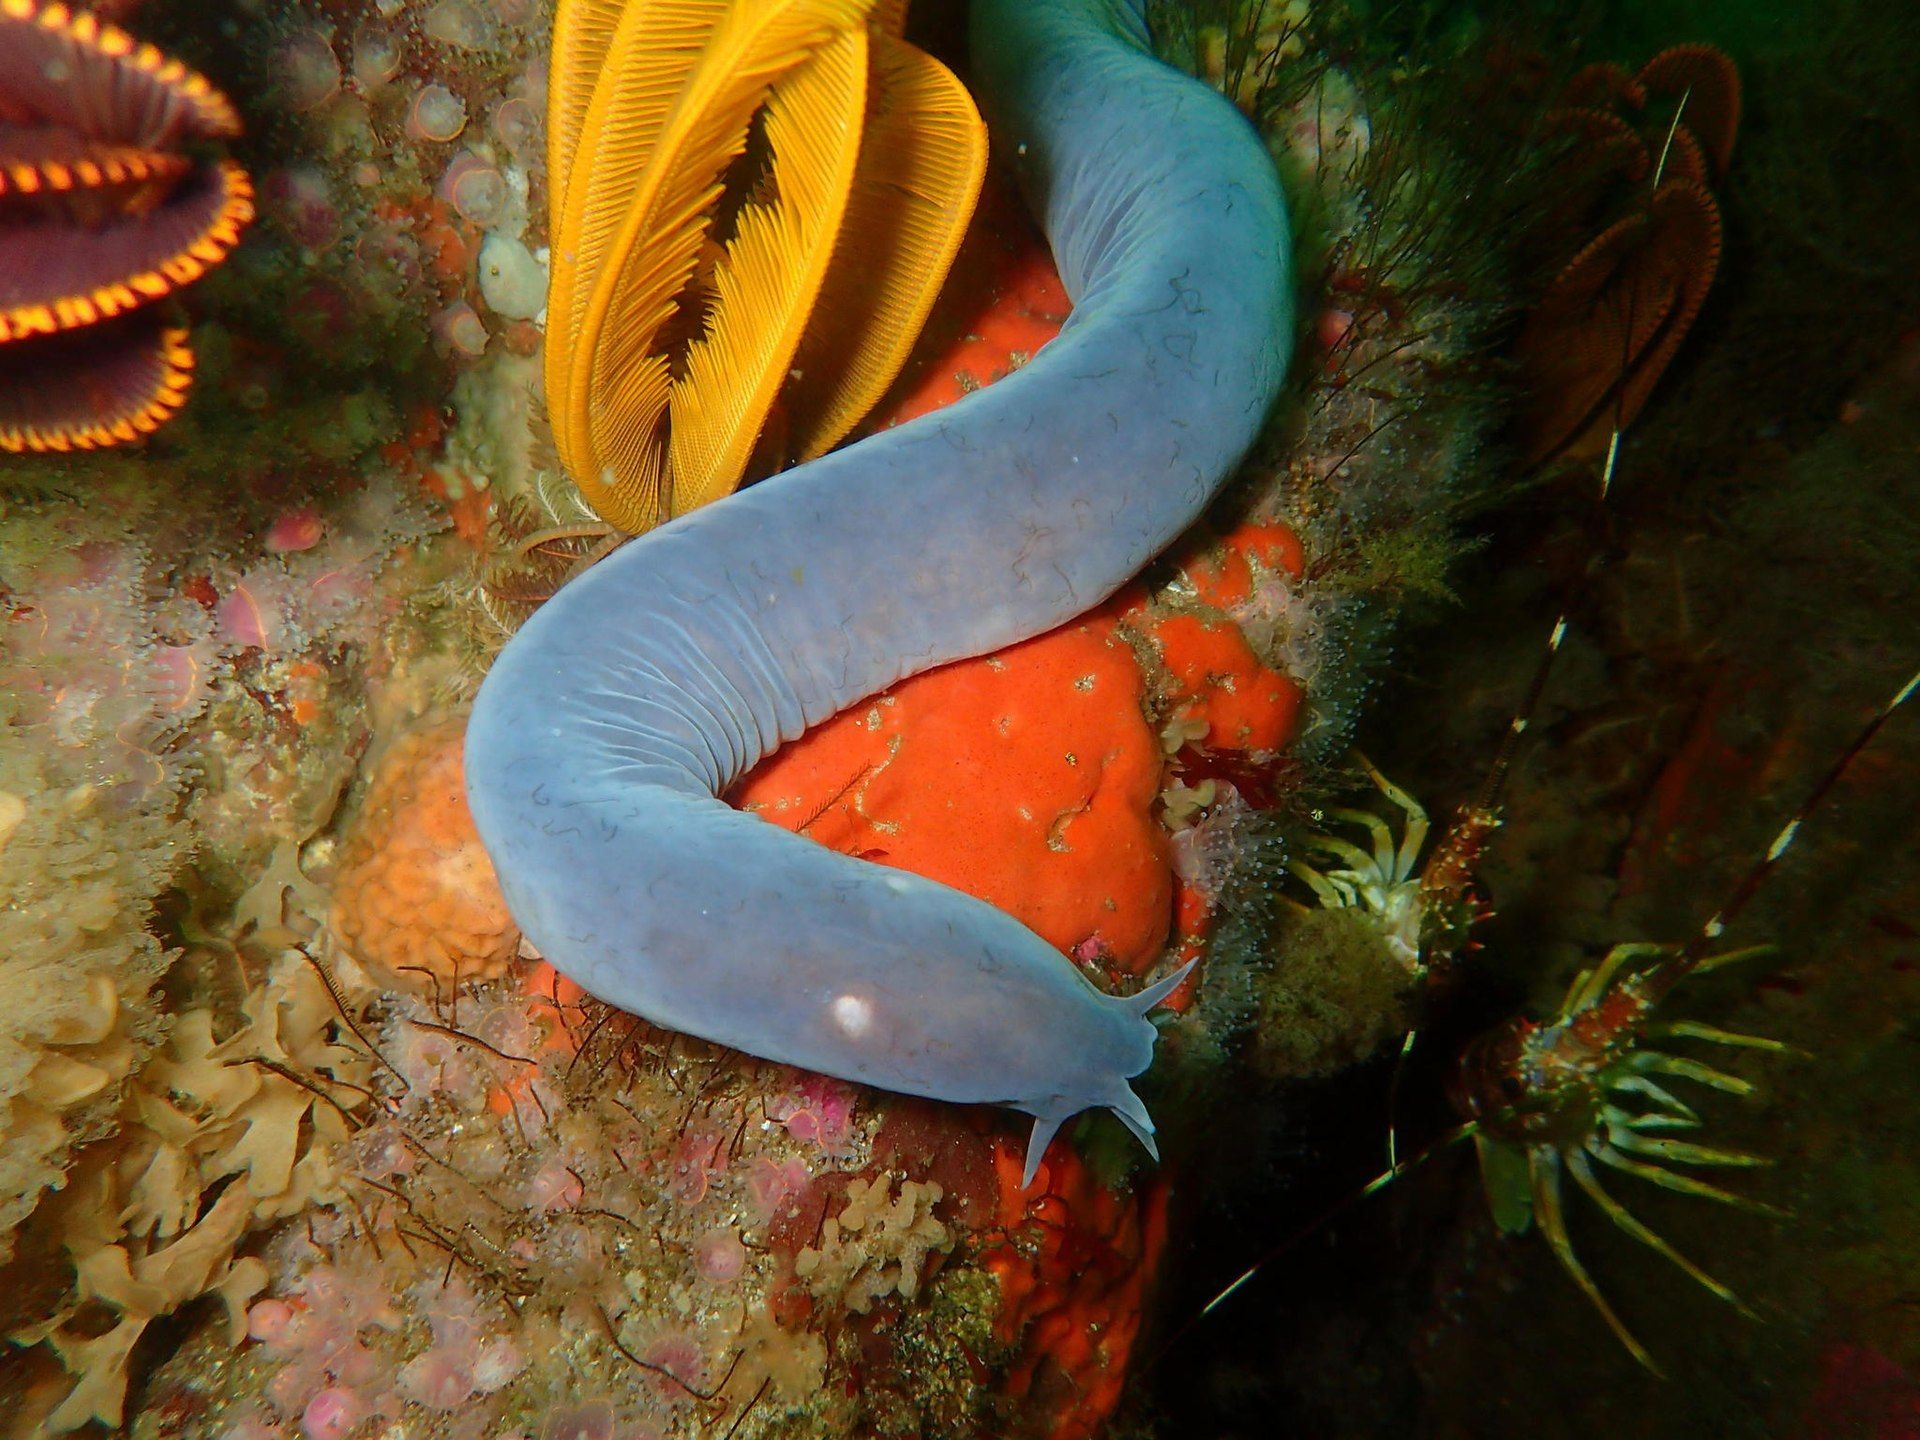 An eel-shaped Sixgill Hagfish under water. It is blue with six barbels on the head and no eyes.